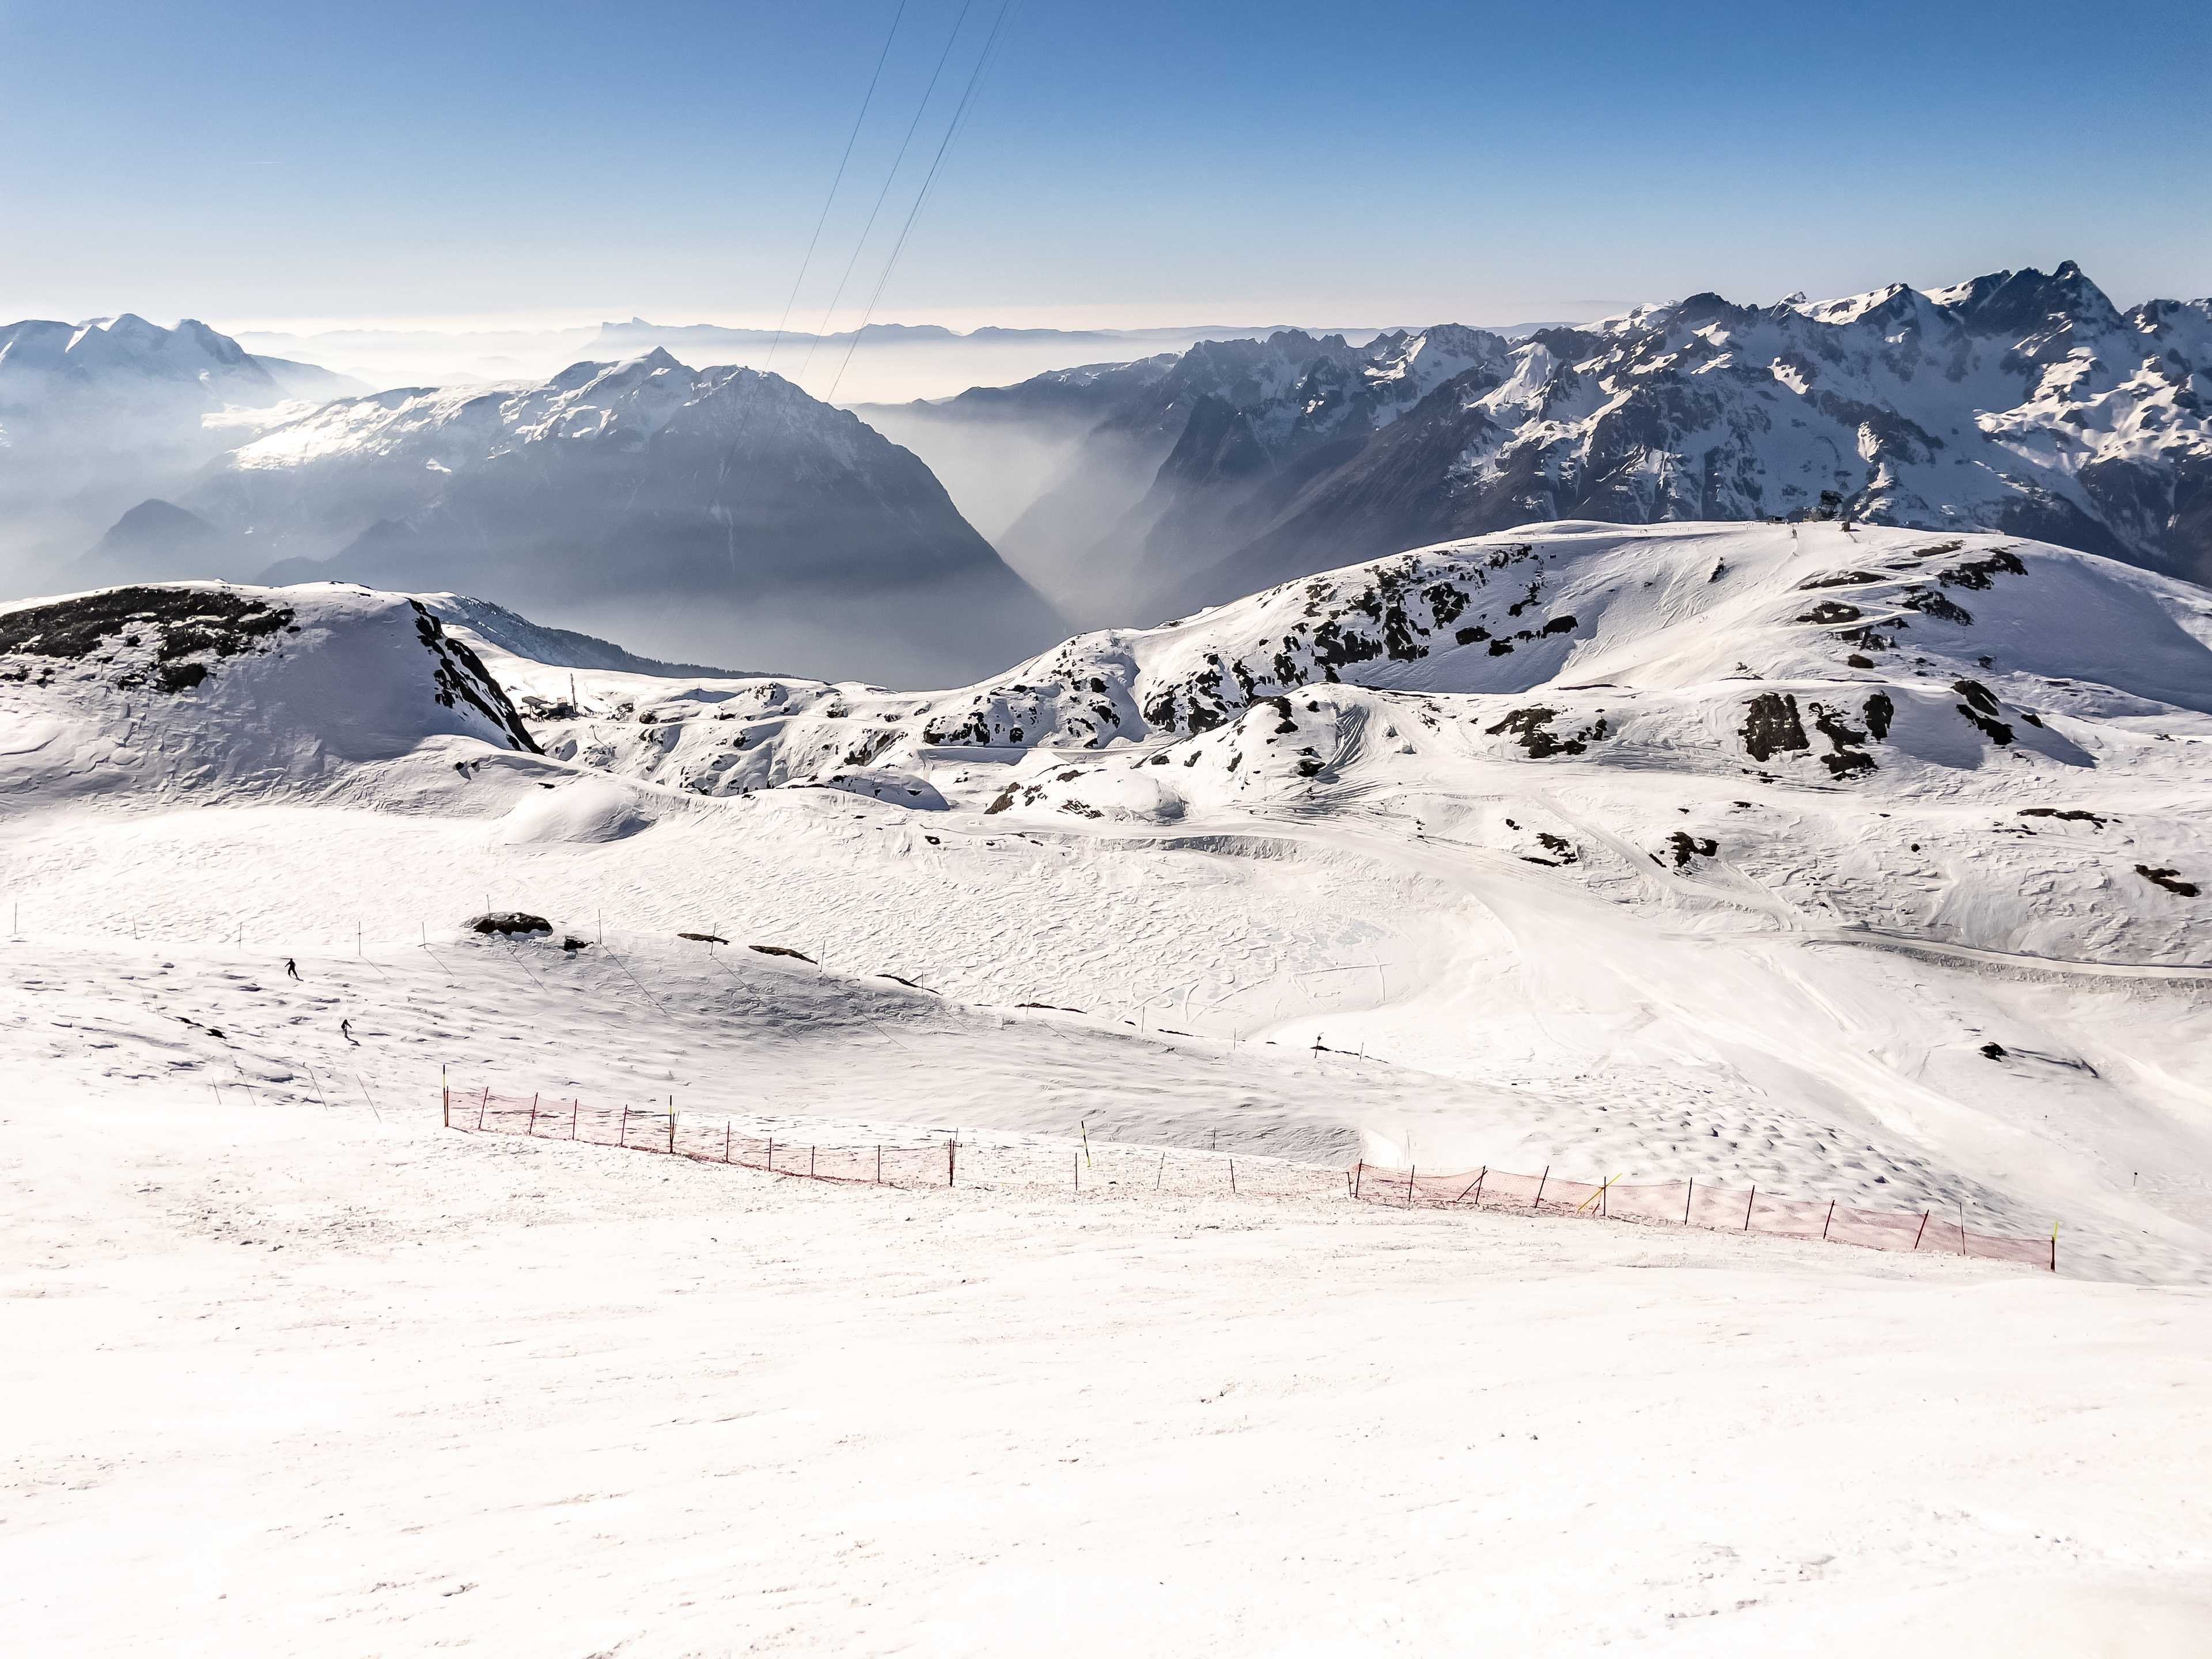 Alpe d'Huez's most difficult slopes are not groomed